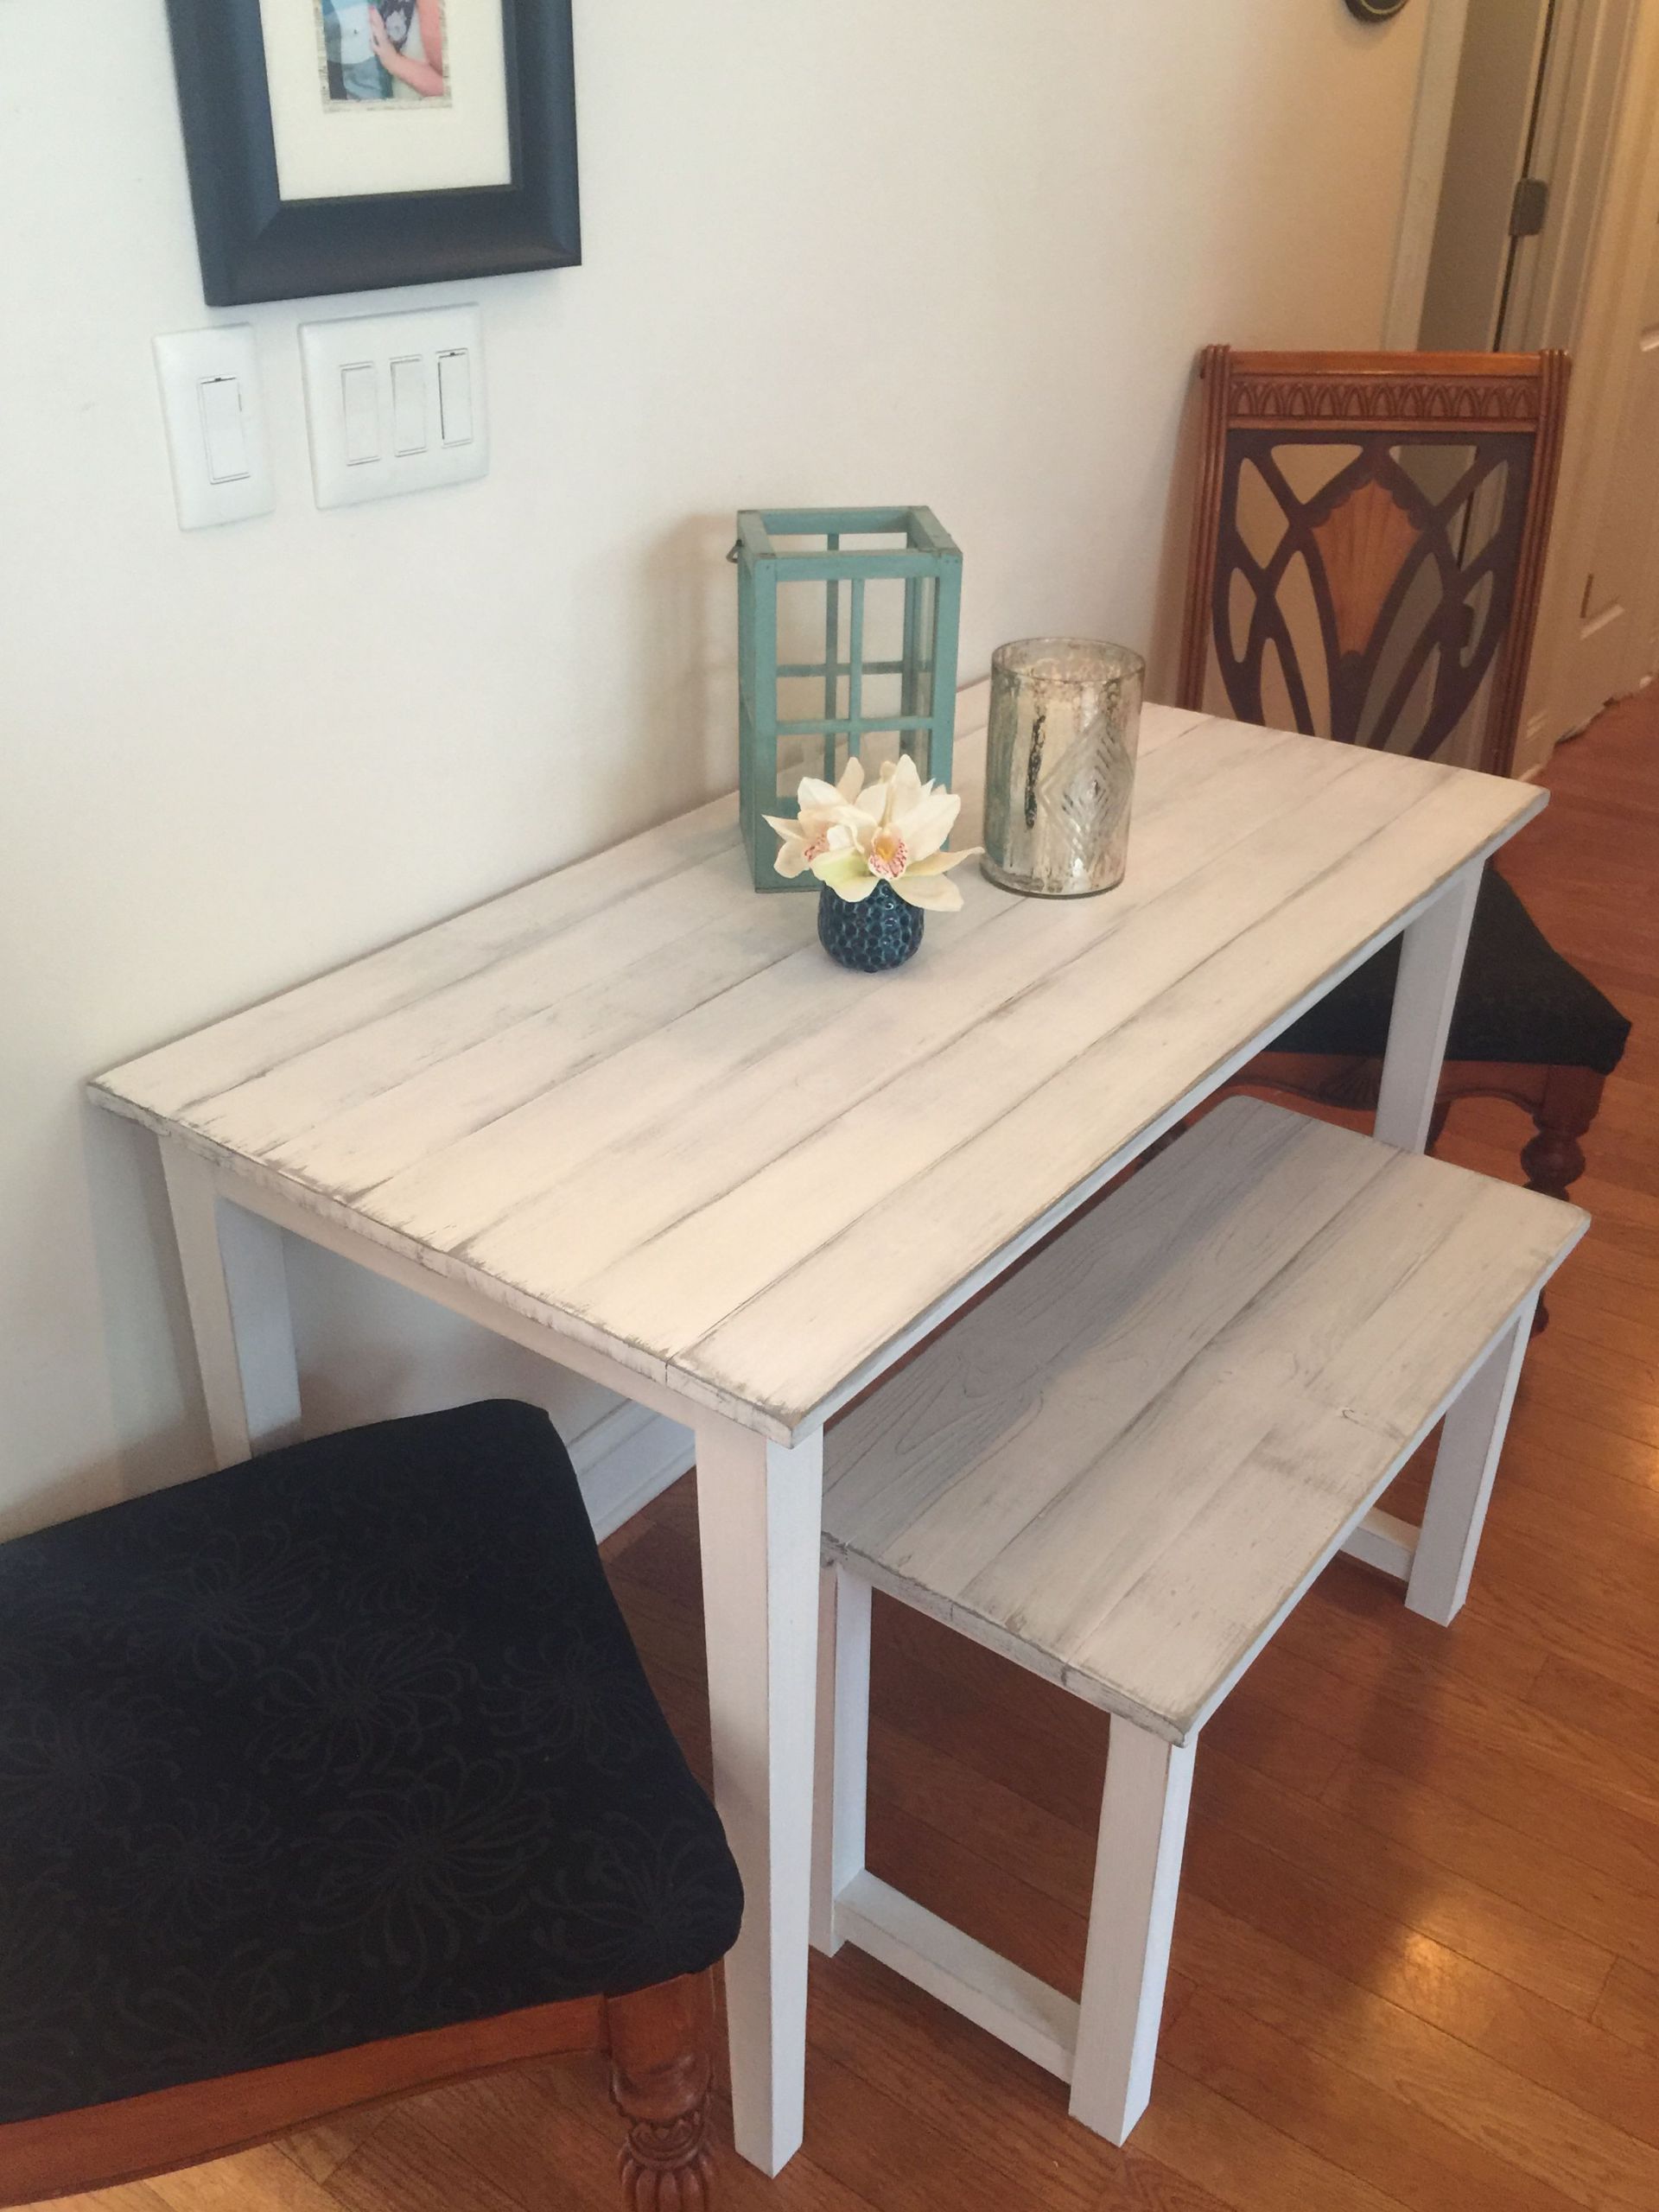 Diy Small Kitchen Table Unique Small Farmhouse Table for Small Room Bench and Distressed